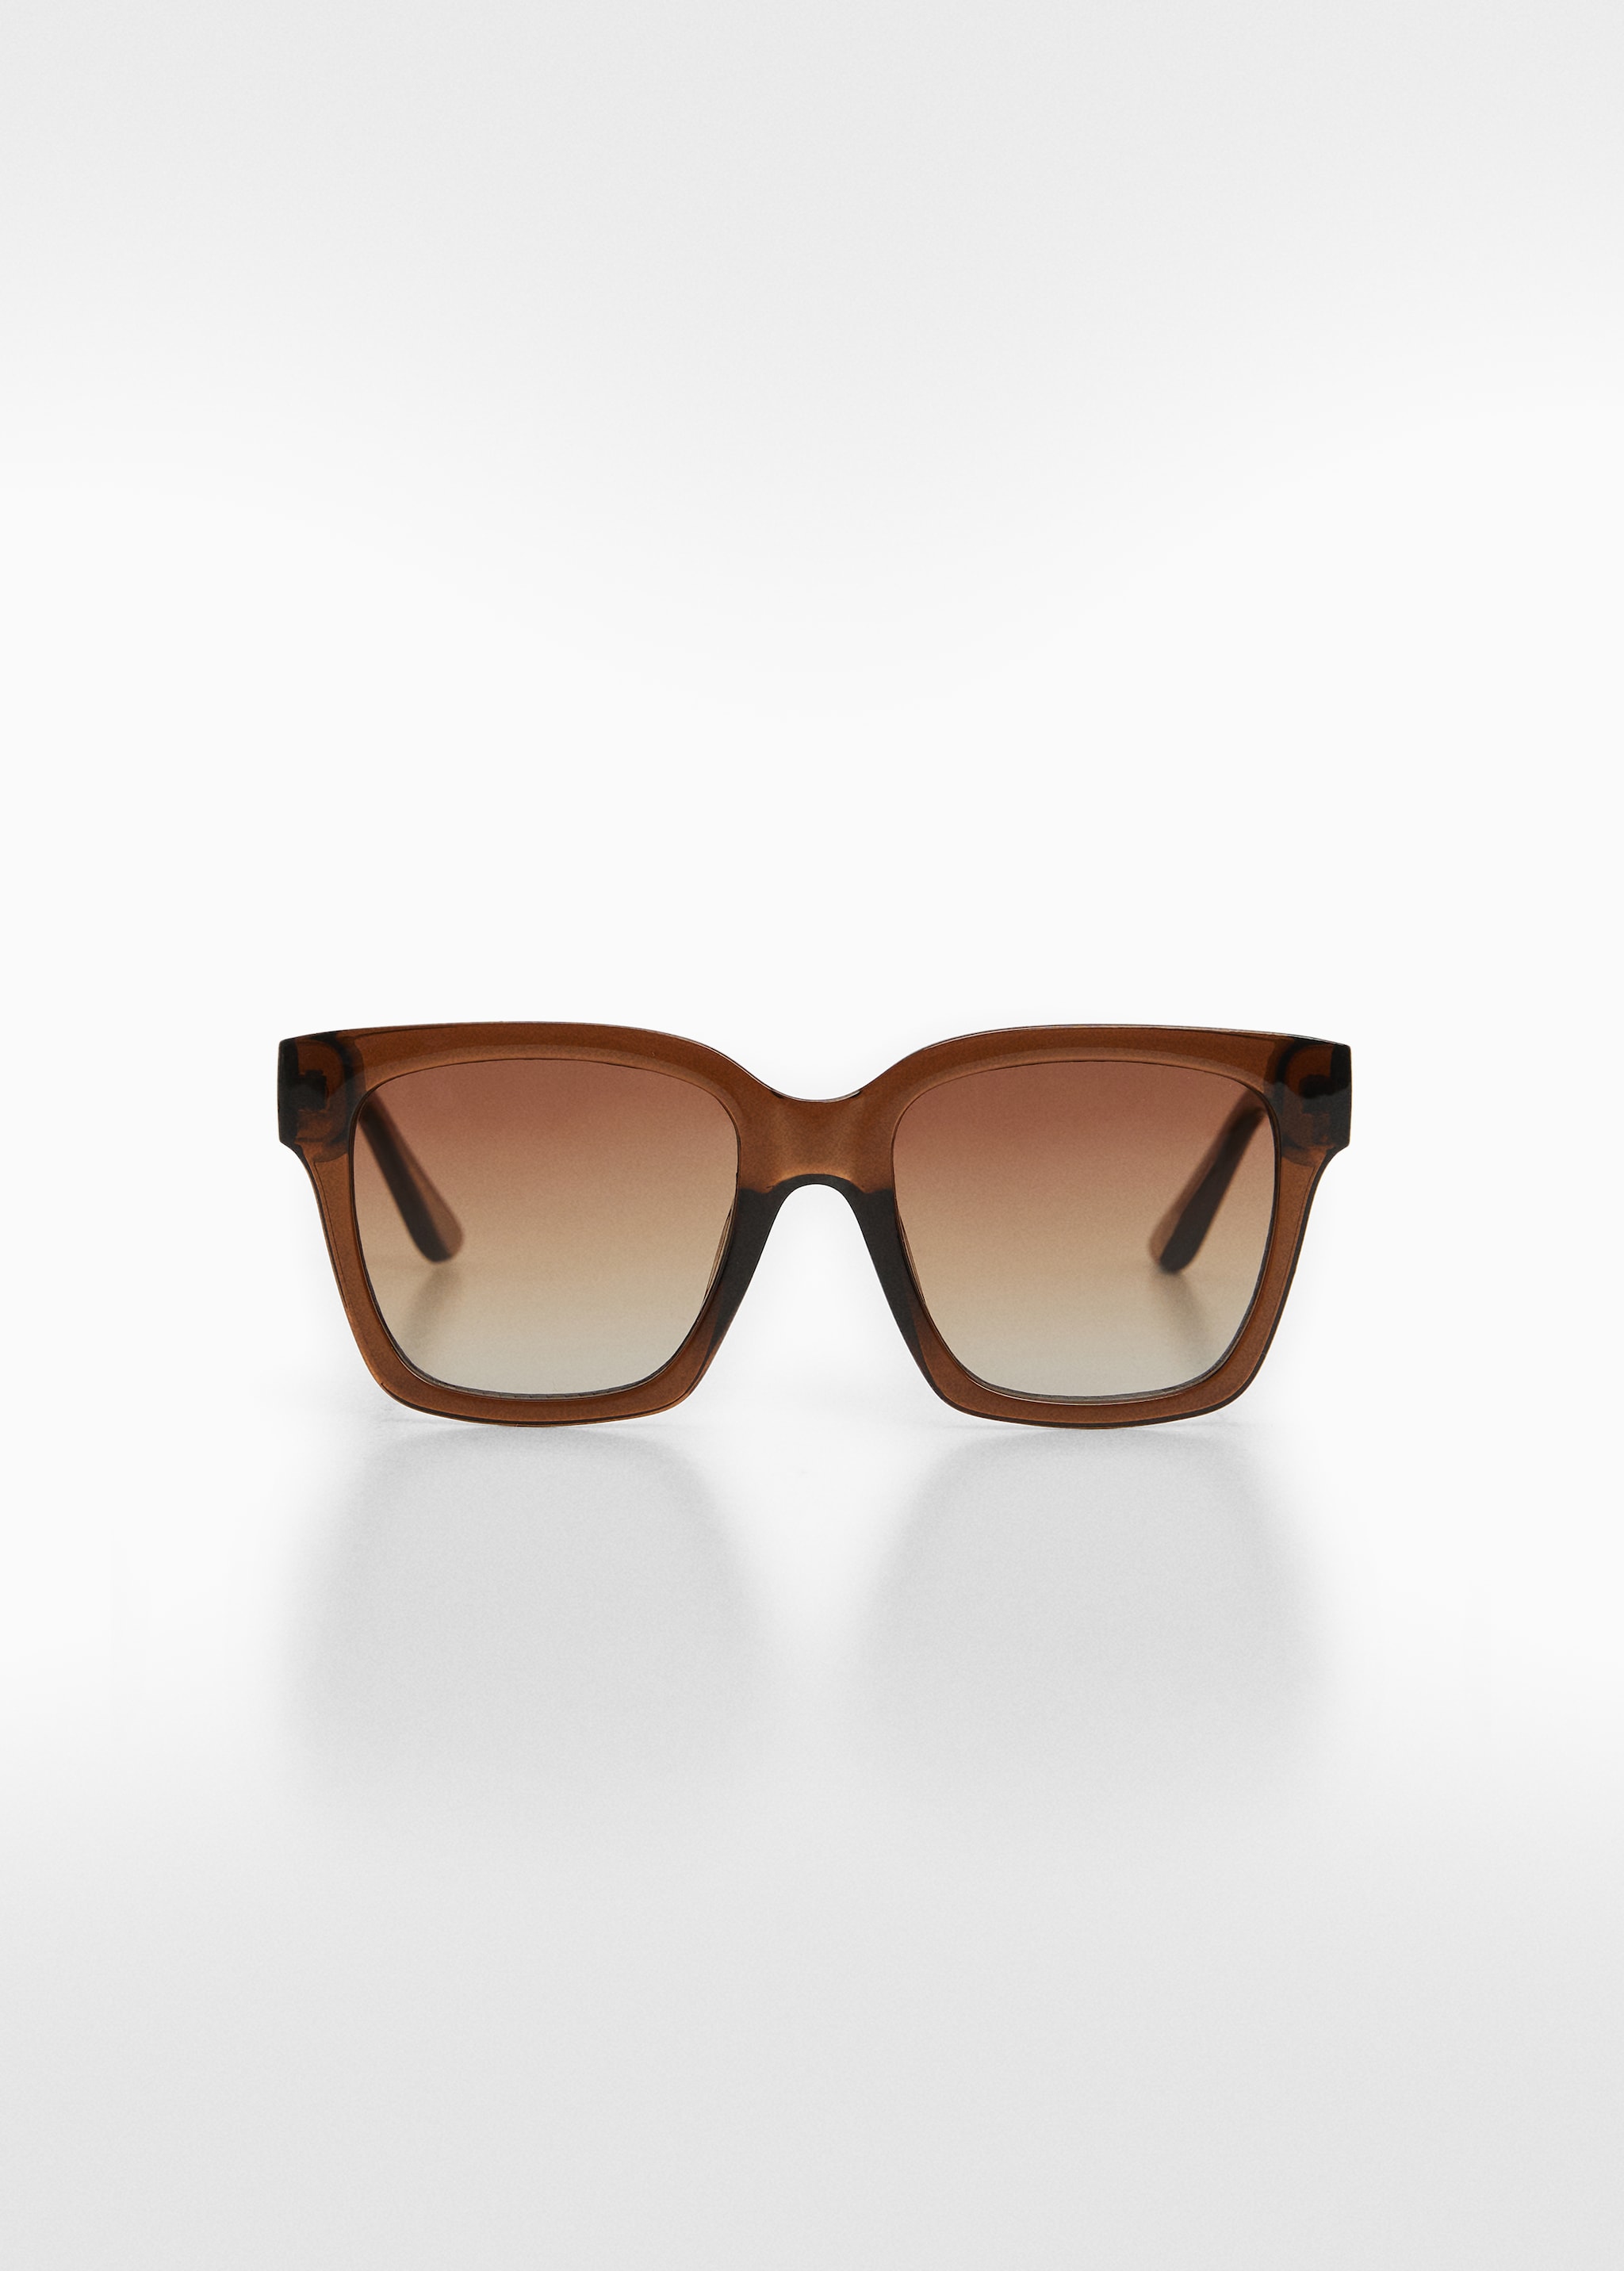 Squared frame sunglasses - Article without model